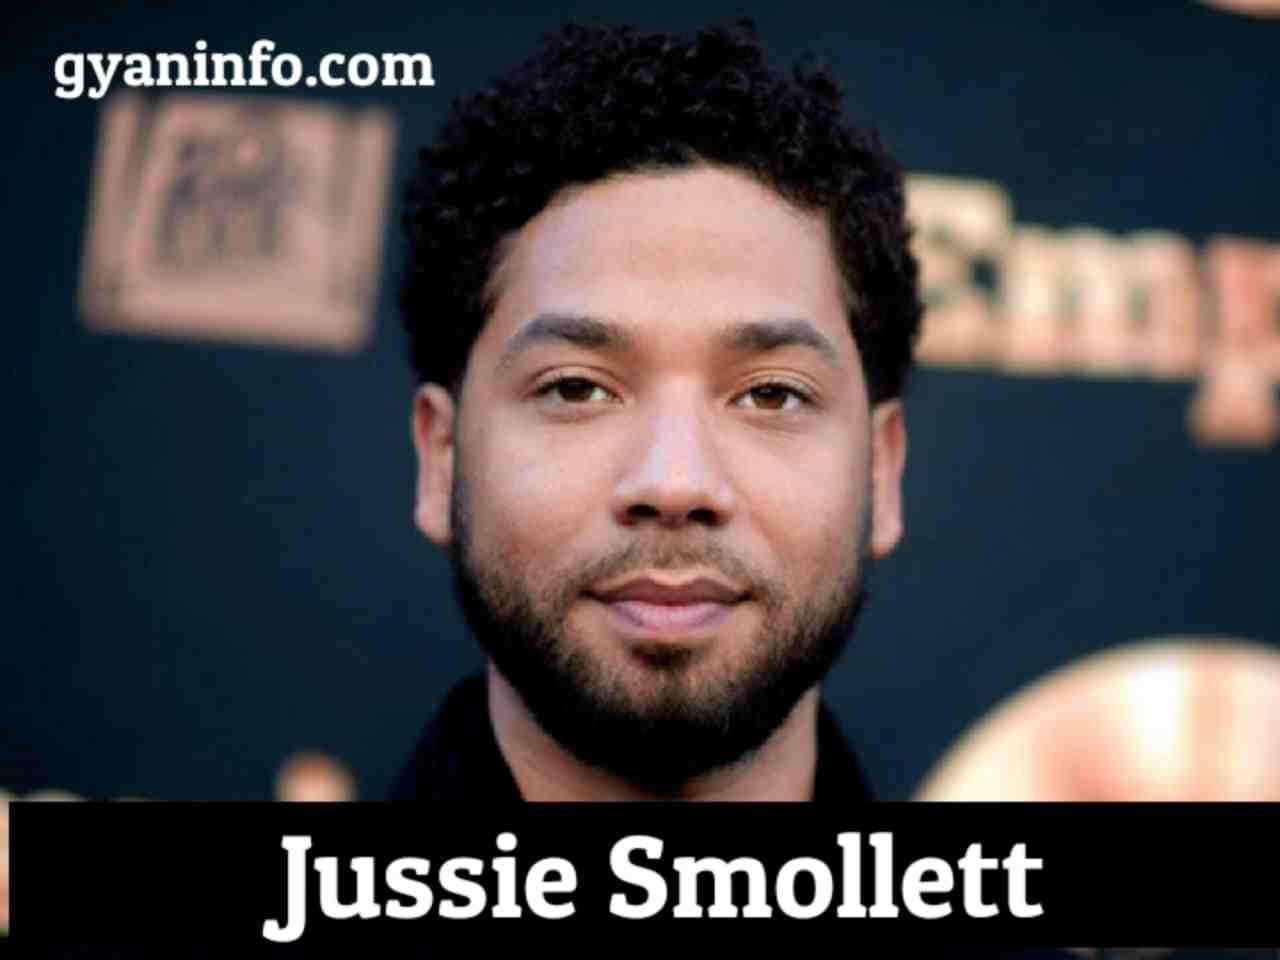 Jussie Smollett Biography, News, Age, Height, Career, Net Worth & More